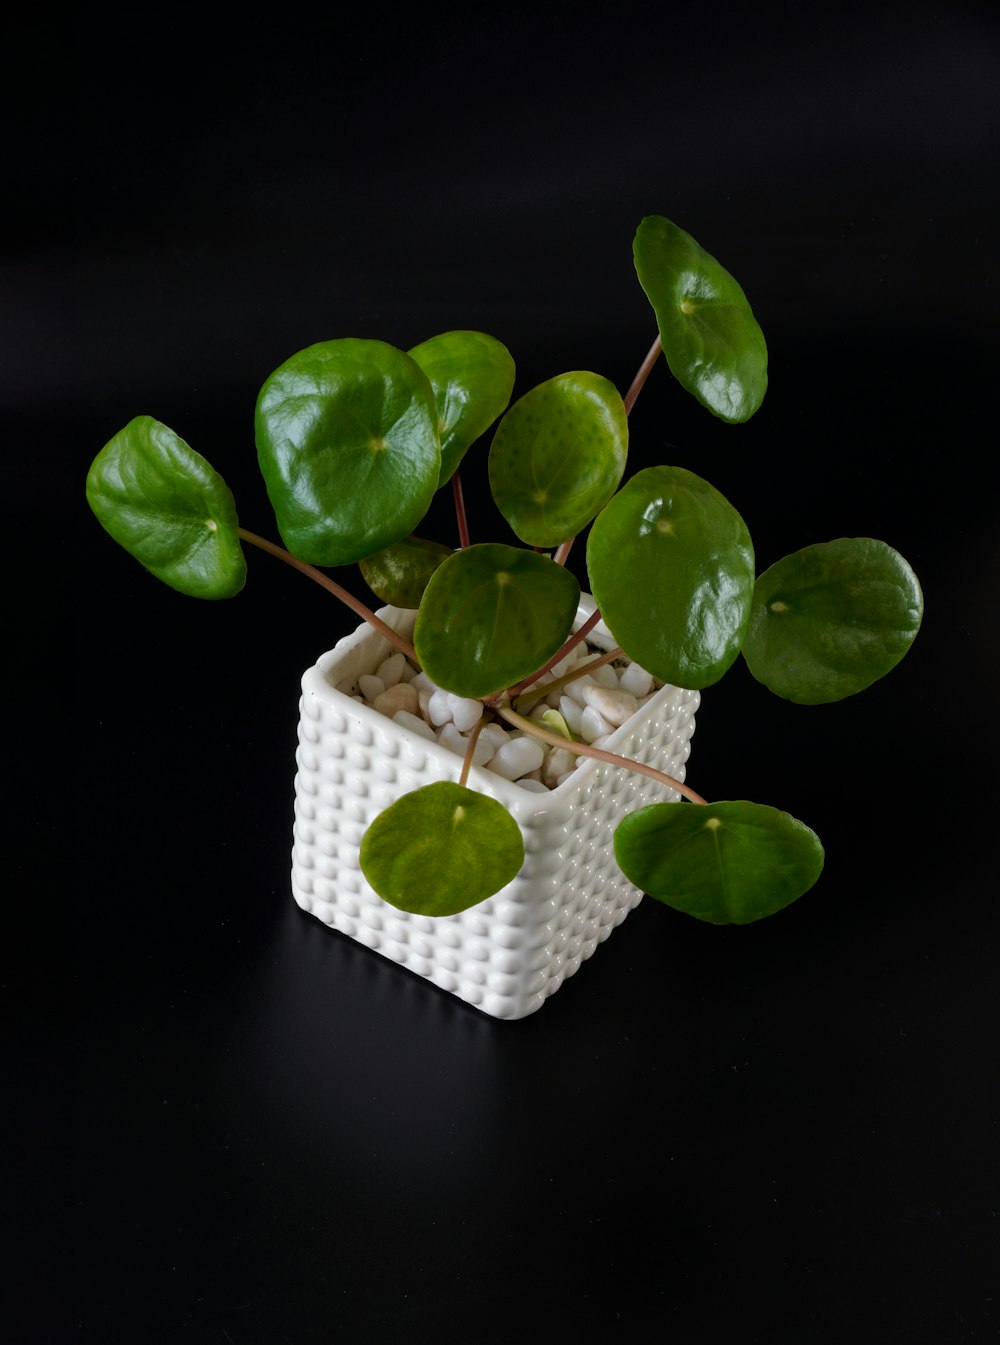 a plant with green leaves in a white basket